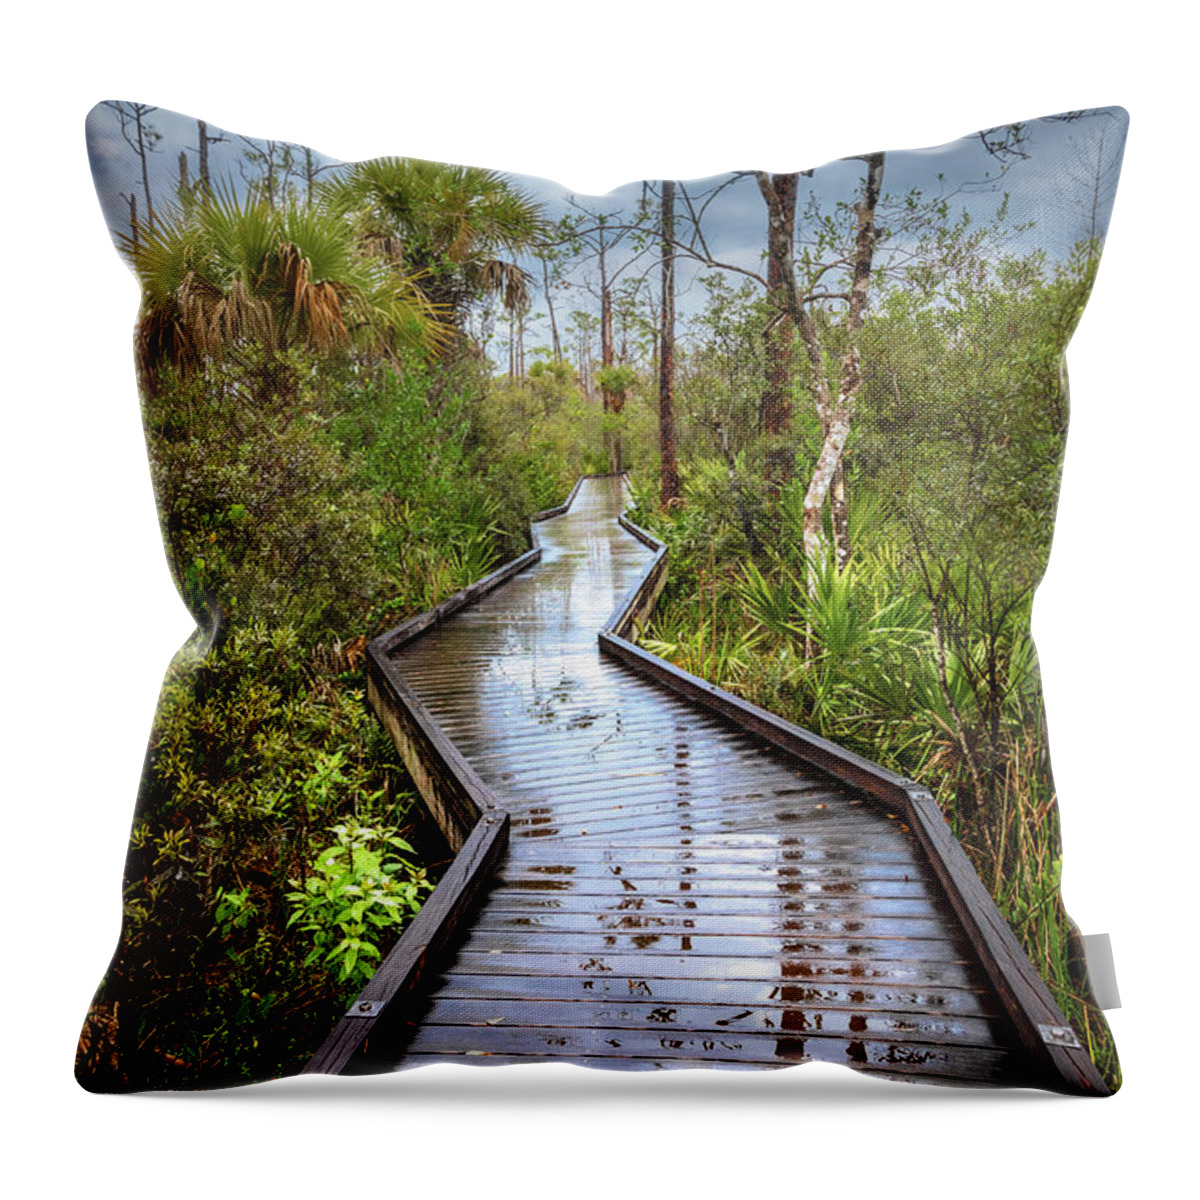 Clouds Throw Pillow featuring the photograph Rainy Reflections on the Boardwalk Trail by Debra and Dave Vanderlaan